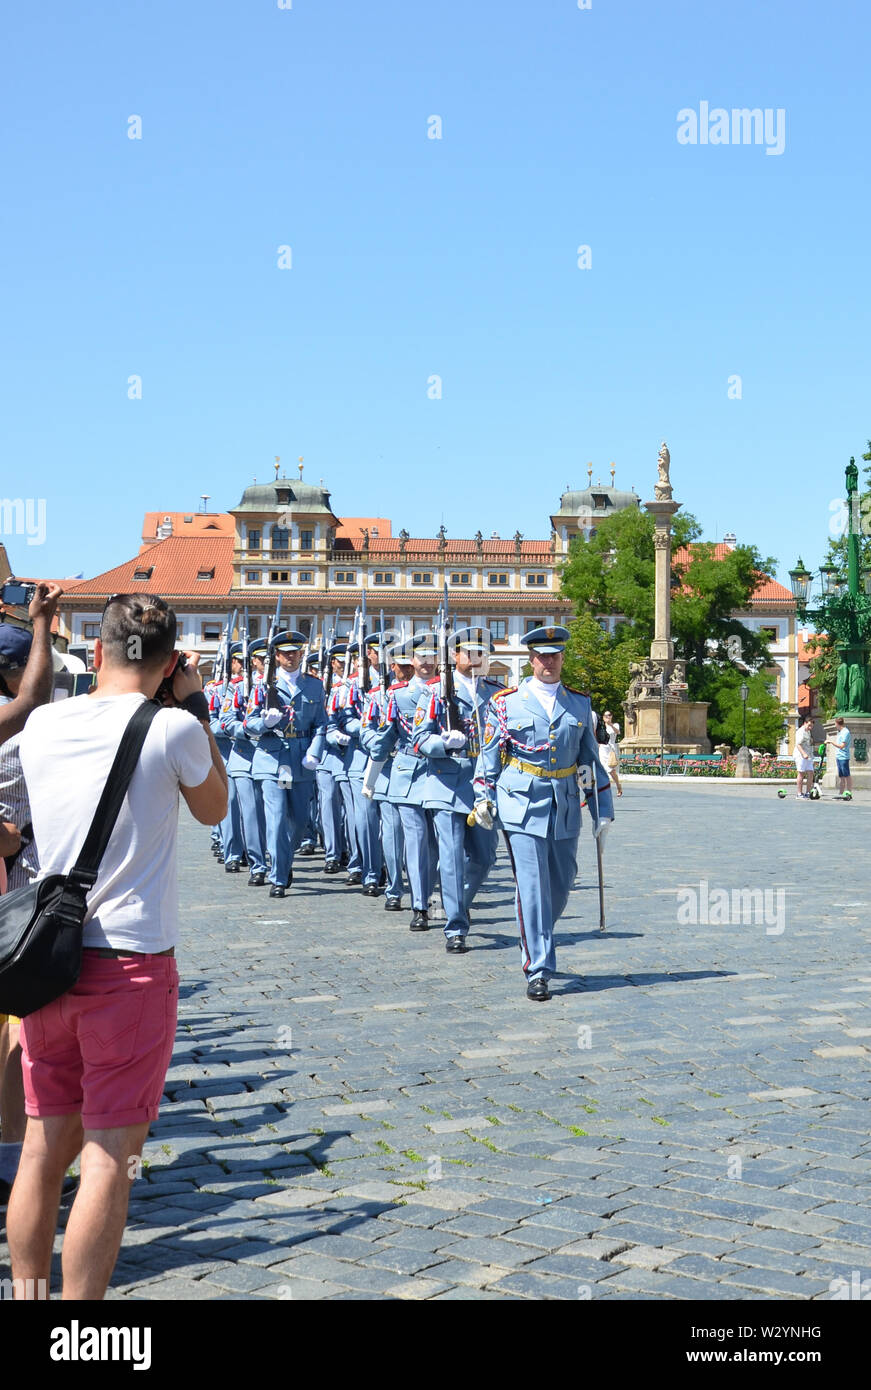 Prague, Czech Republic - June 27th 2019: Tourists watching traditional changing of honor guards in front of the Prague Castle. Prague Castle Guard. Crowd of people. Tourist attraction. Stock Photo